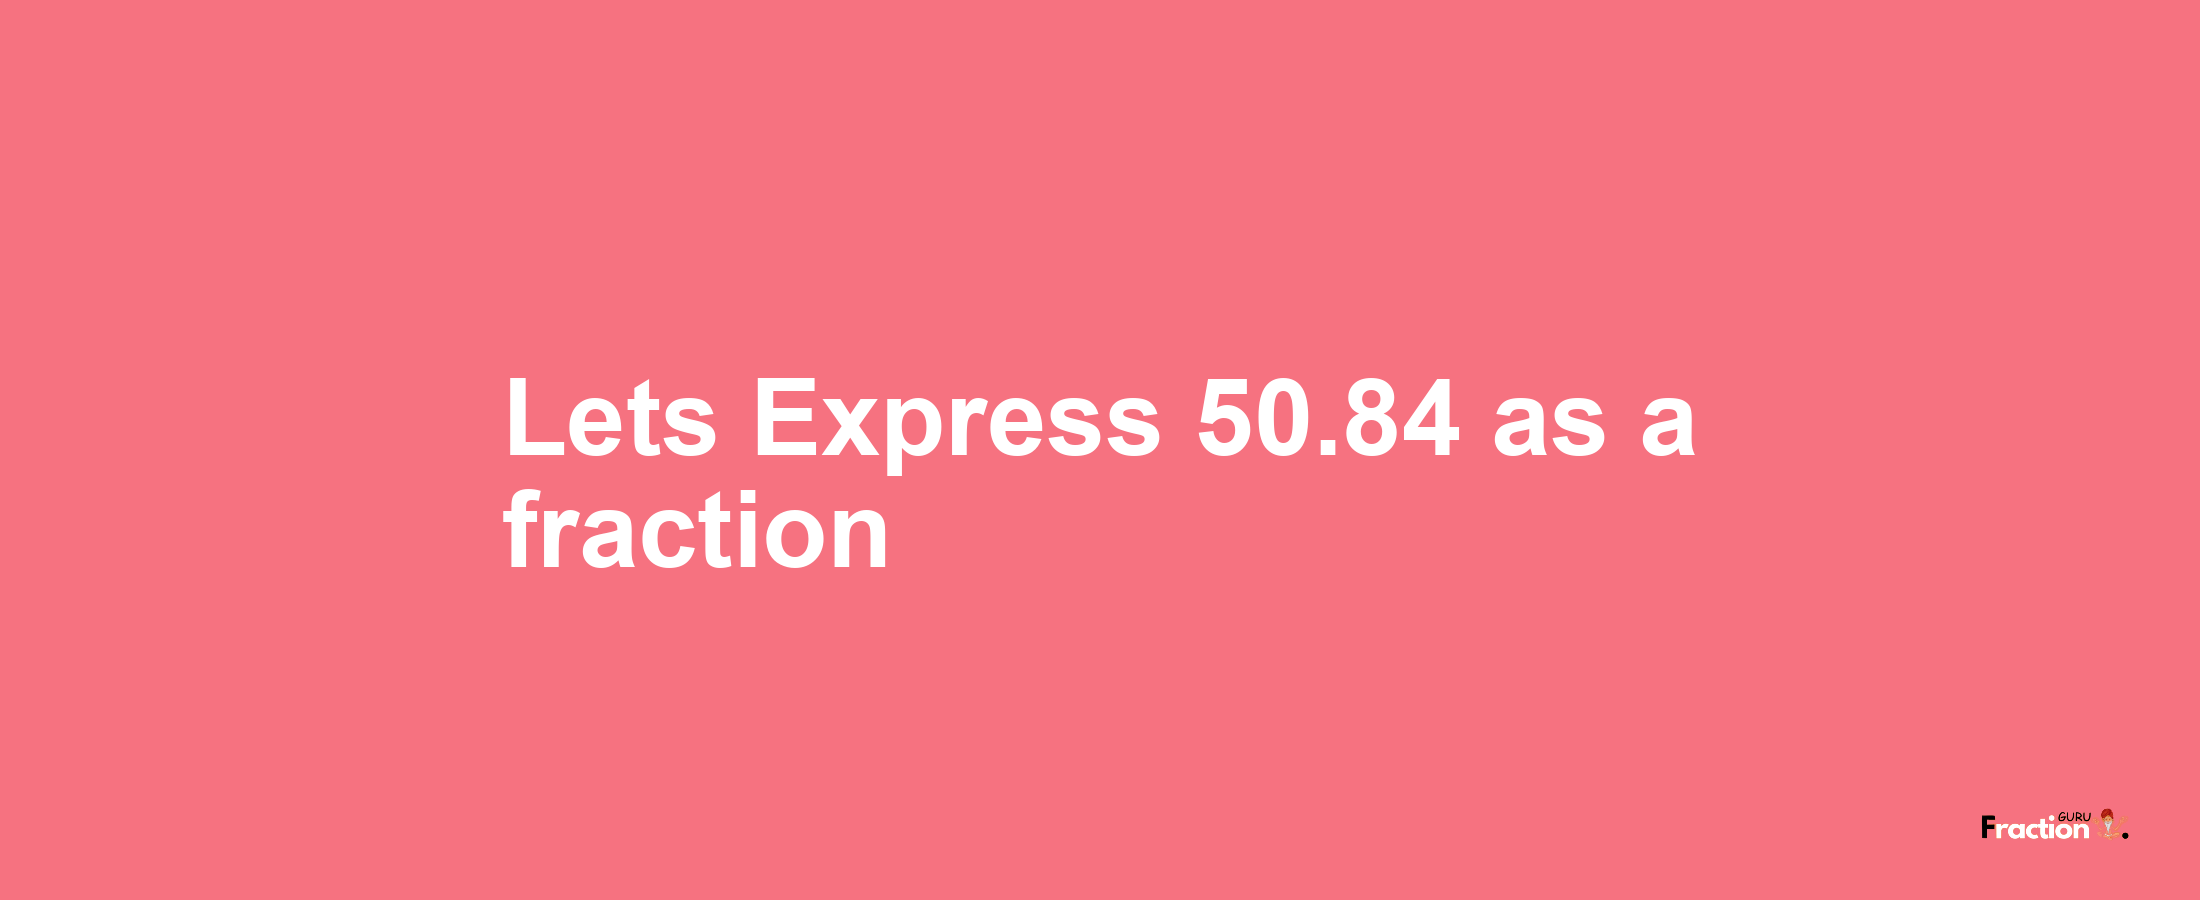 Lets Express 50.84 as afraction